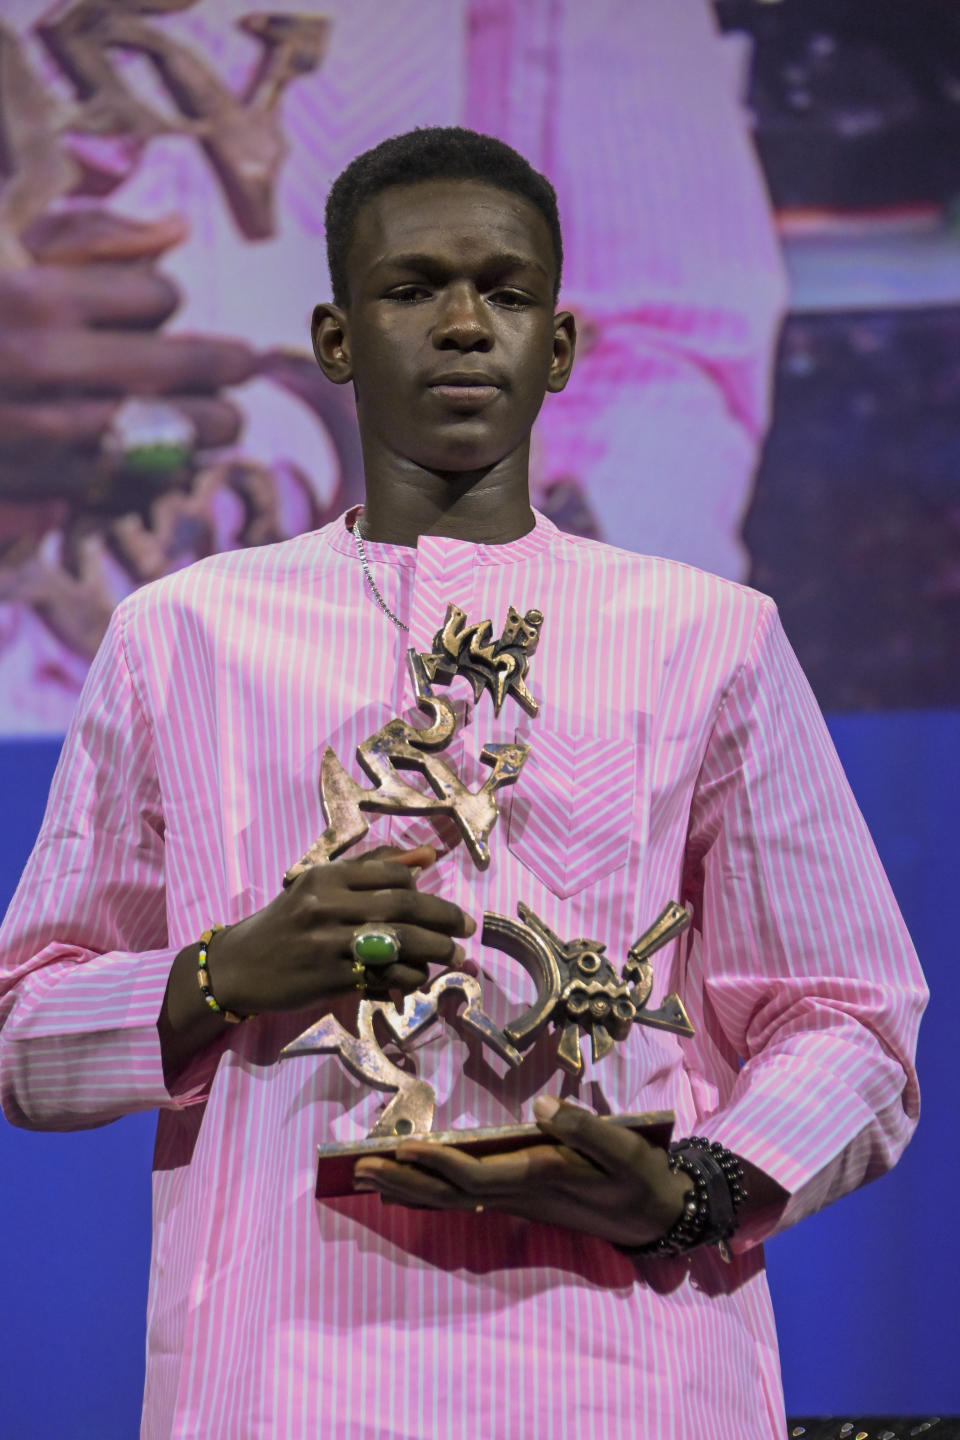 FILE - Actor Seydou Sarr poses with the 'Marcello Mastroianni' award for Best New Young Actor, which he received for his performance in Io Capitano (Me Captain), during the closing ceremony for the 80th edition of the Venice Film Festival in Venice, Italy, Saturday, Sept. 9, 2023. Matteo Garrone's Io Capitano 96th Academy Awards-nominee in the International Feature Film category is inspired by Mamadou Kouassi, a migrant who made the journey from his native Ivory Coast to Italy and now dedicates his life to working with migrants in Castel Volturno, an impoverished city near Naples in southern Italy where thousands of migrants from Africa live. (Gian Mattia D'Alberto/LaPresse via AP)